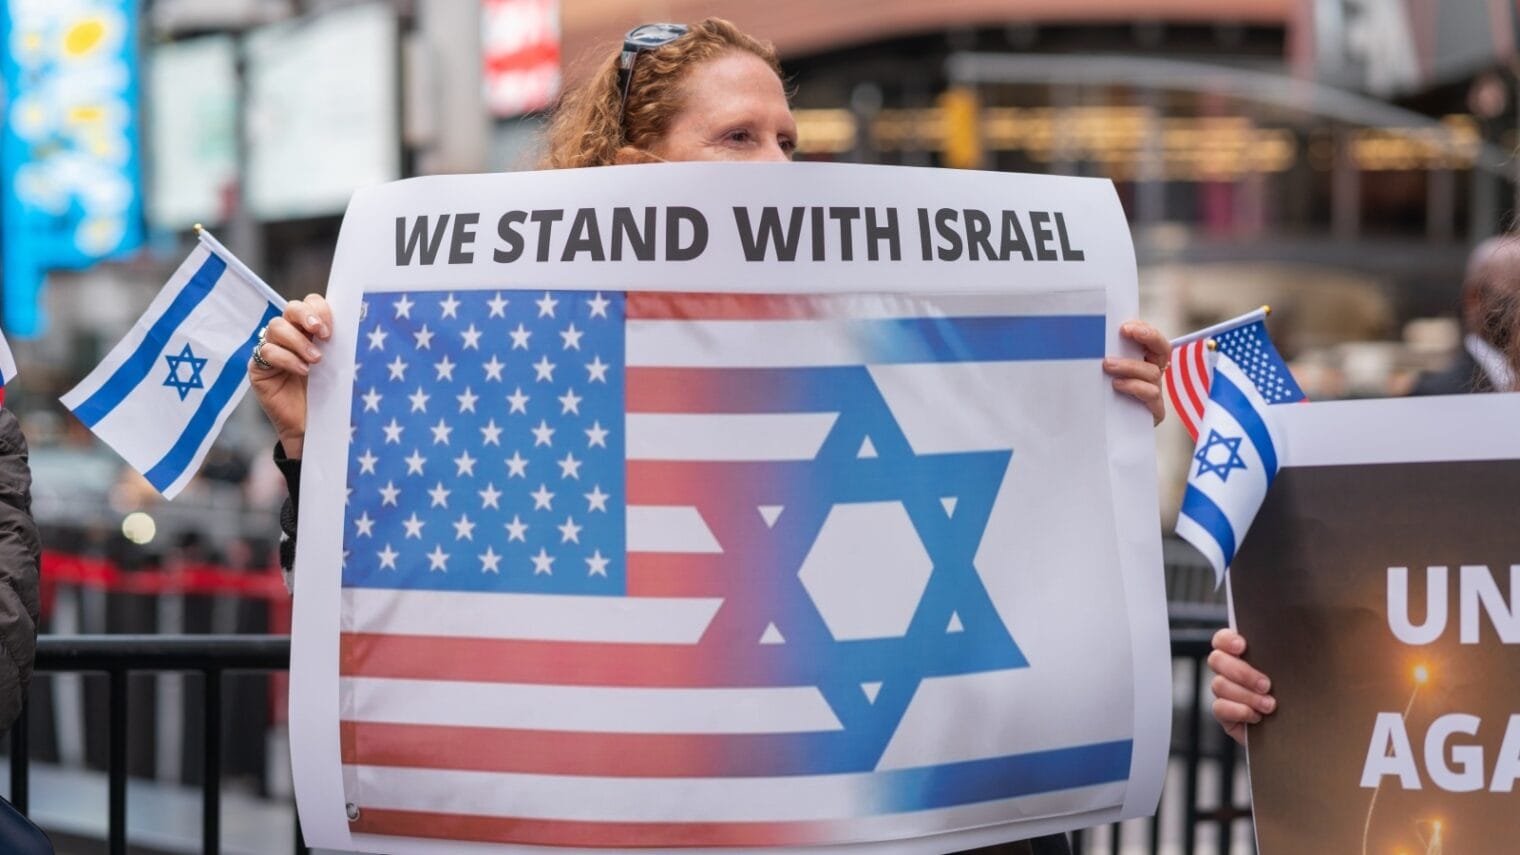 An Israel supporter in New York City. Photo by Steve Sanchez Photos via Shutterstock.com